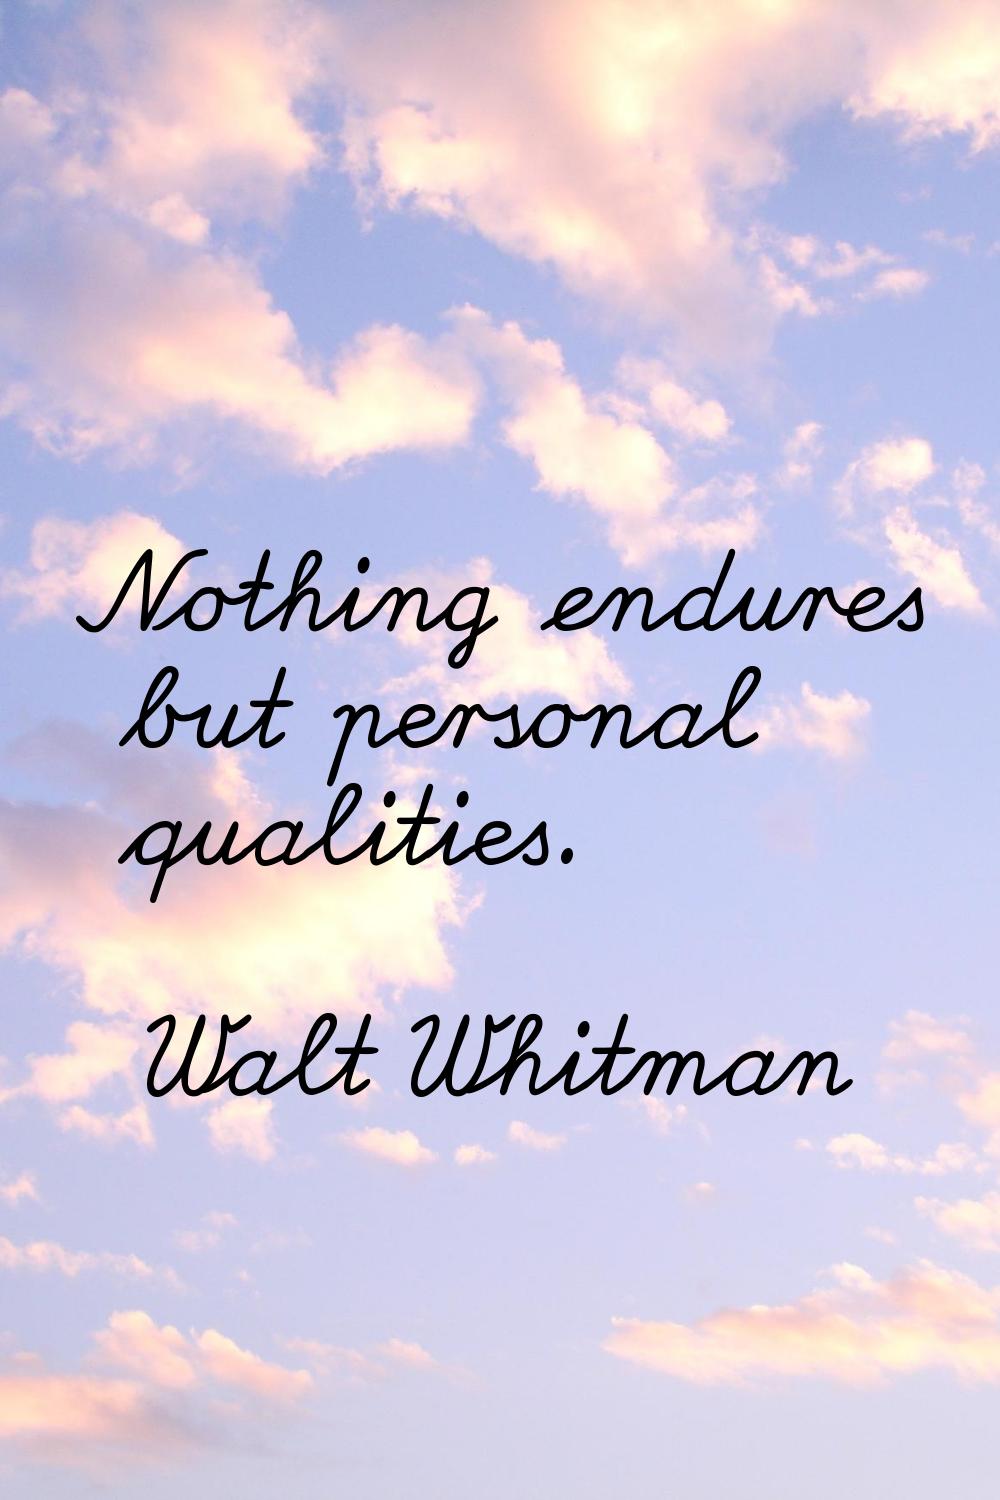 Nothing endures but personal qualities.